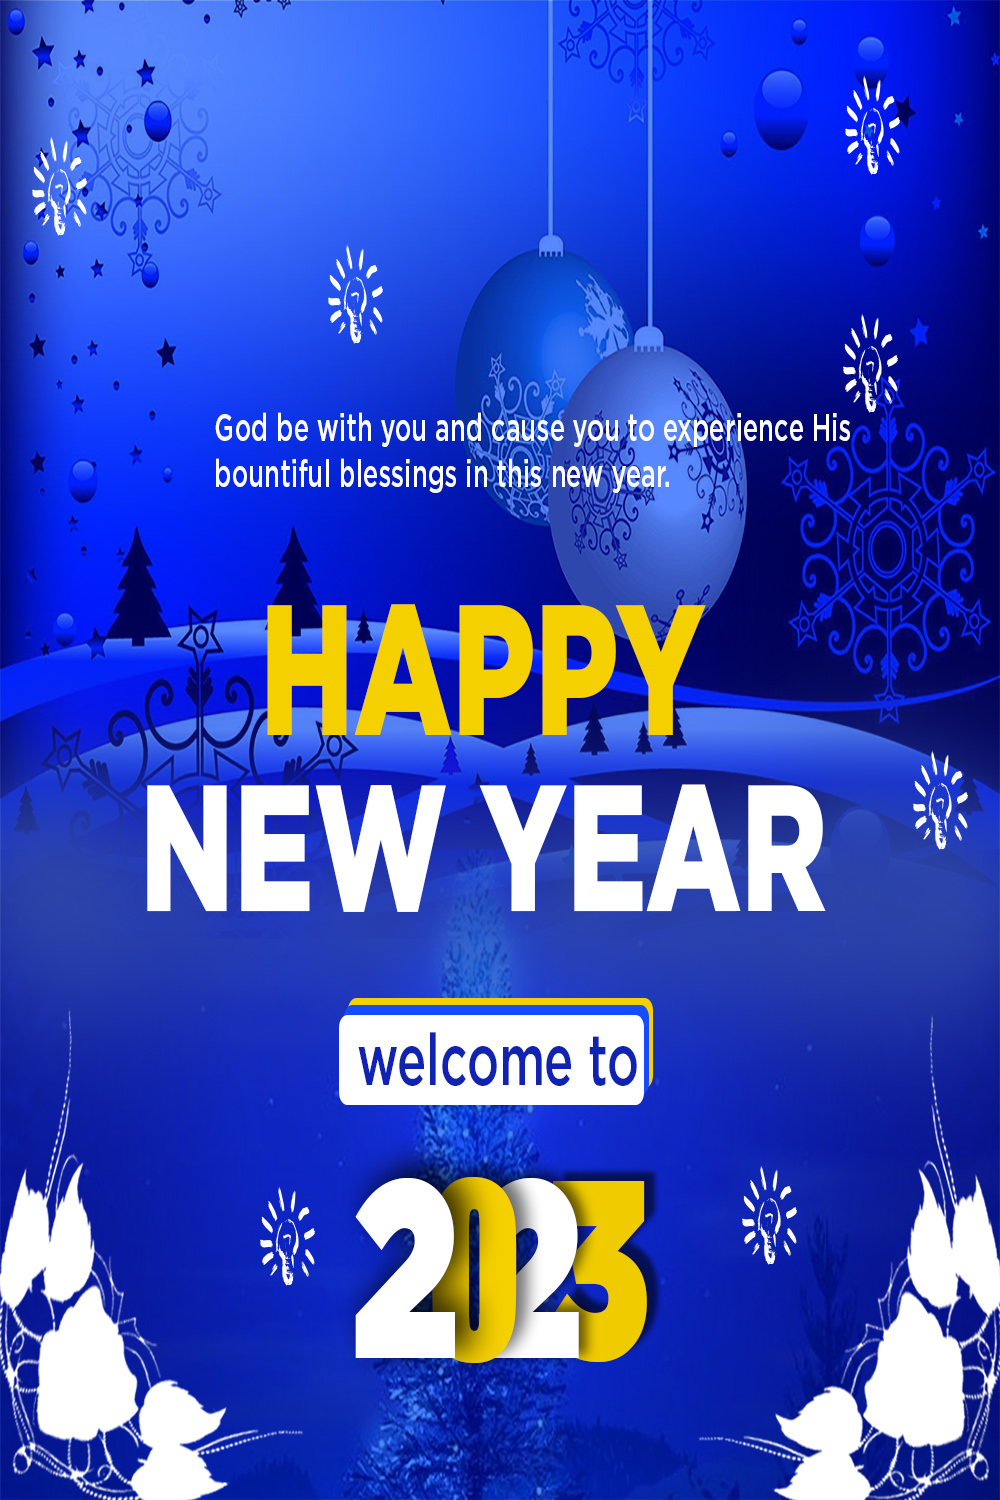 Image of a wonderful New Year flyer in blue color